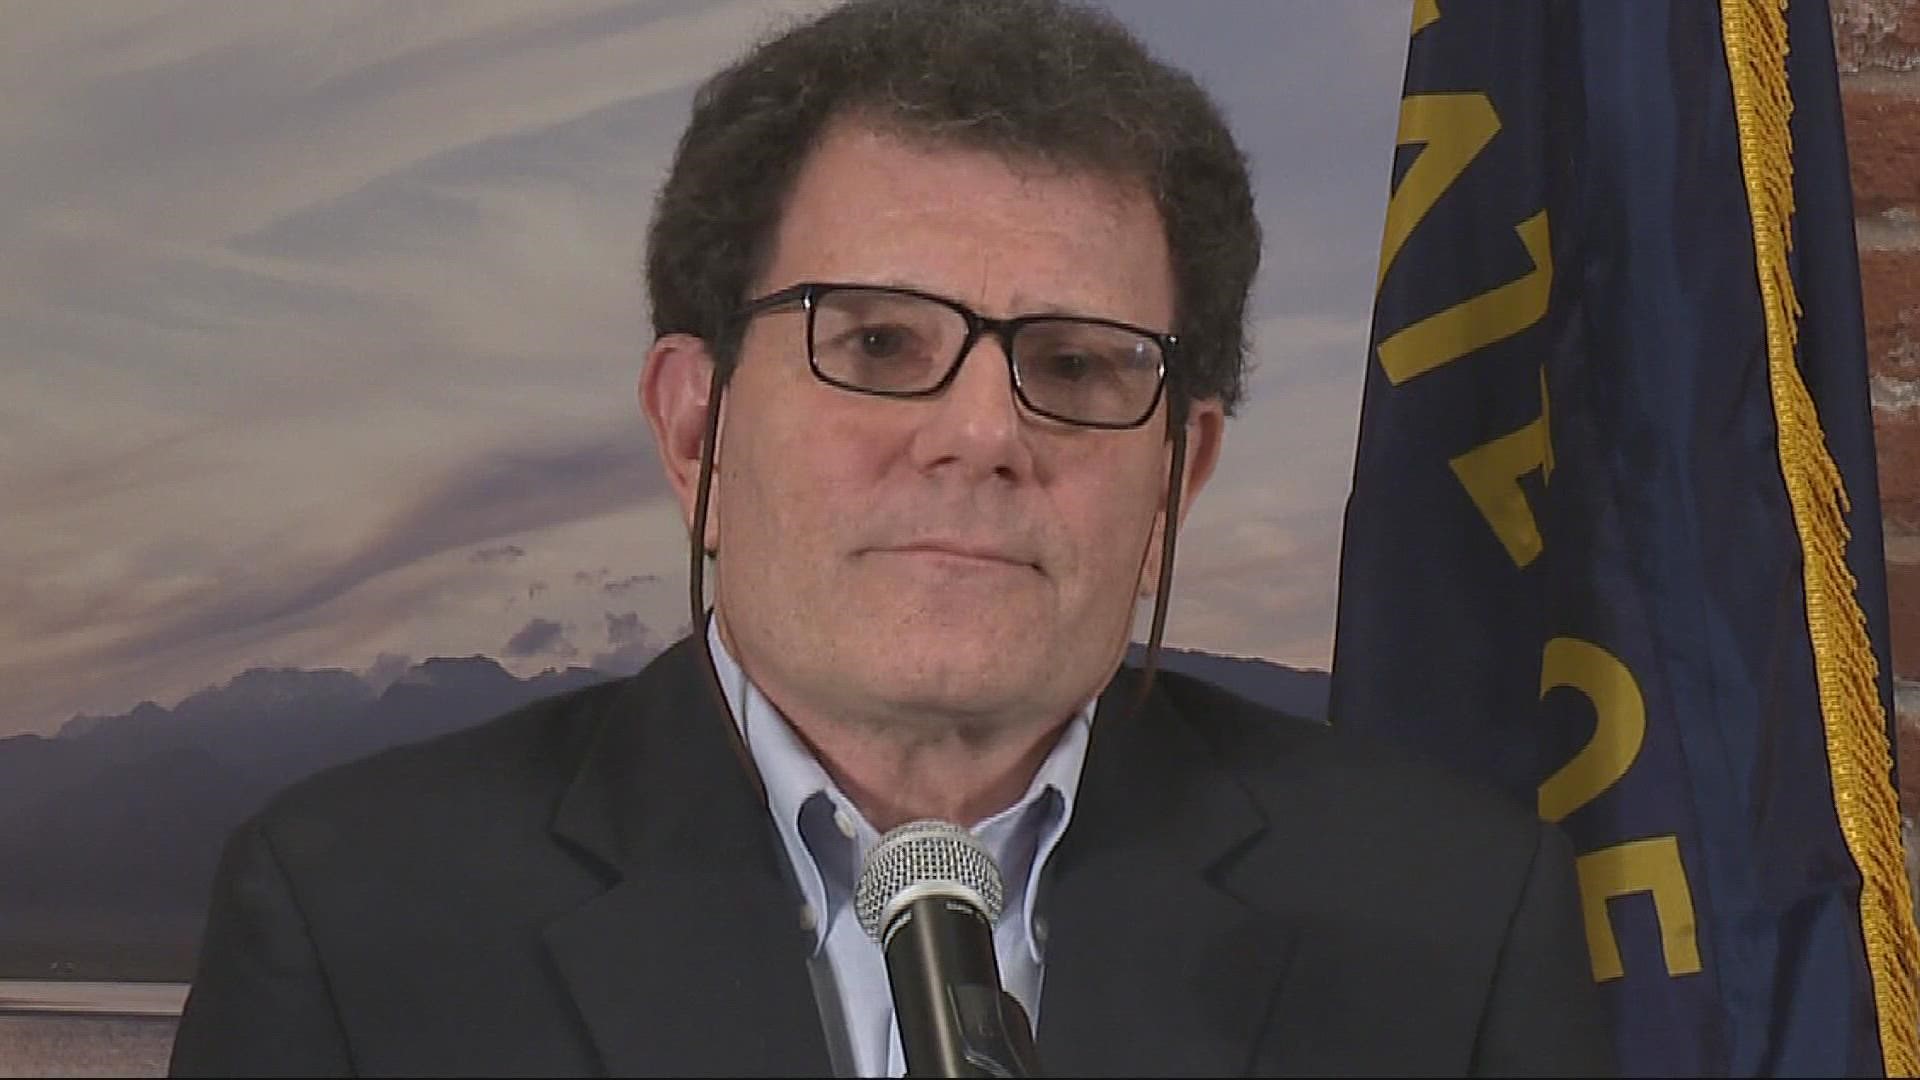 The Oregon Supreme Court upheld a decision to block Nick Kristof from the ballot due to residency issues. Kristof acknowledged the verdict and ended his campaign.